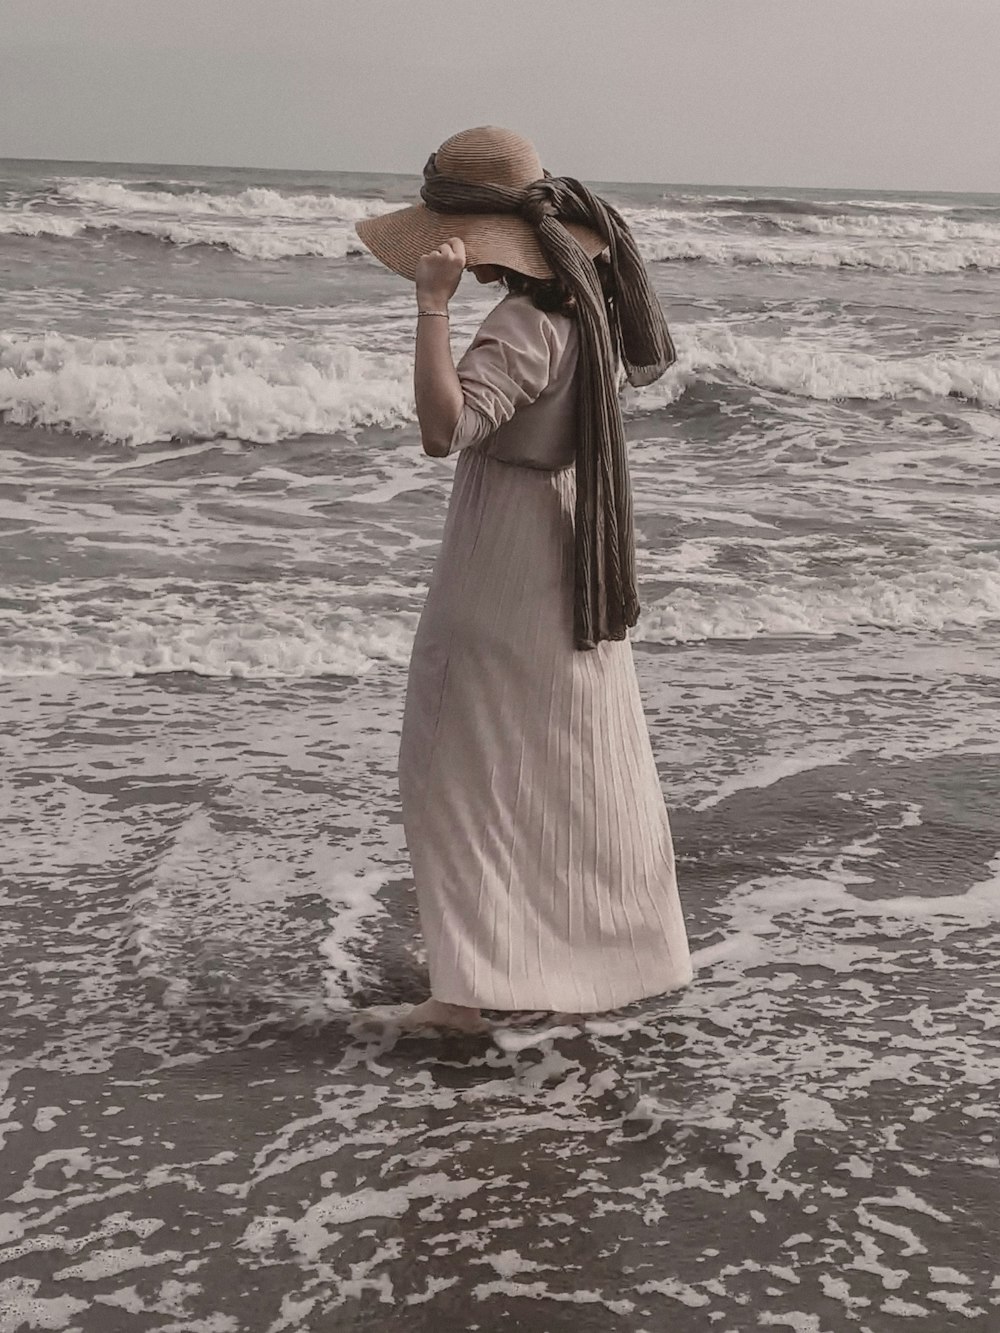 a woman in a dress and hat standing in the ocean